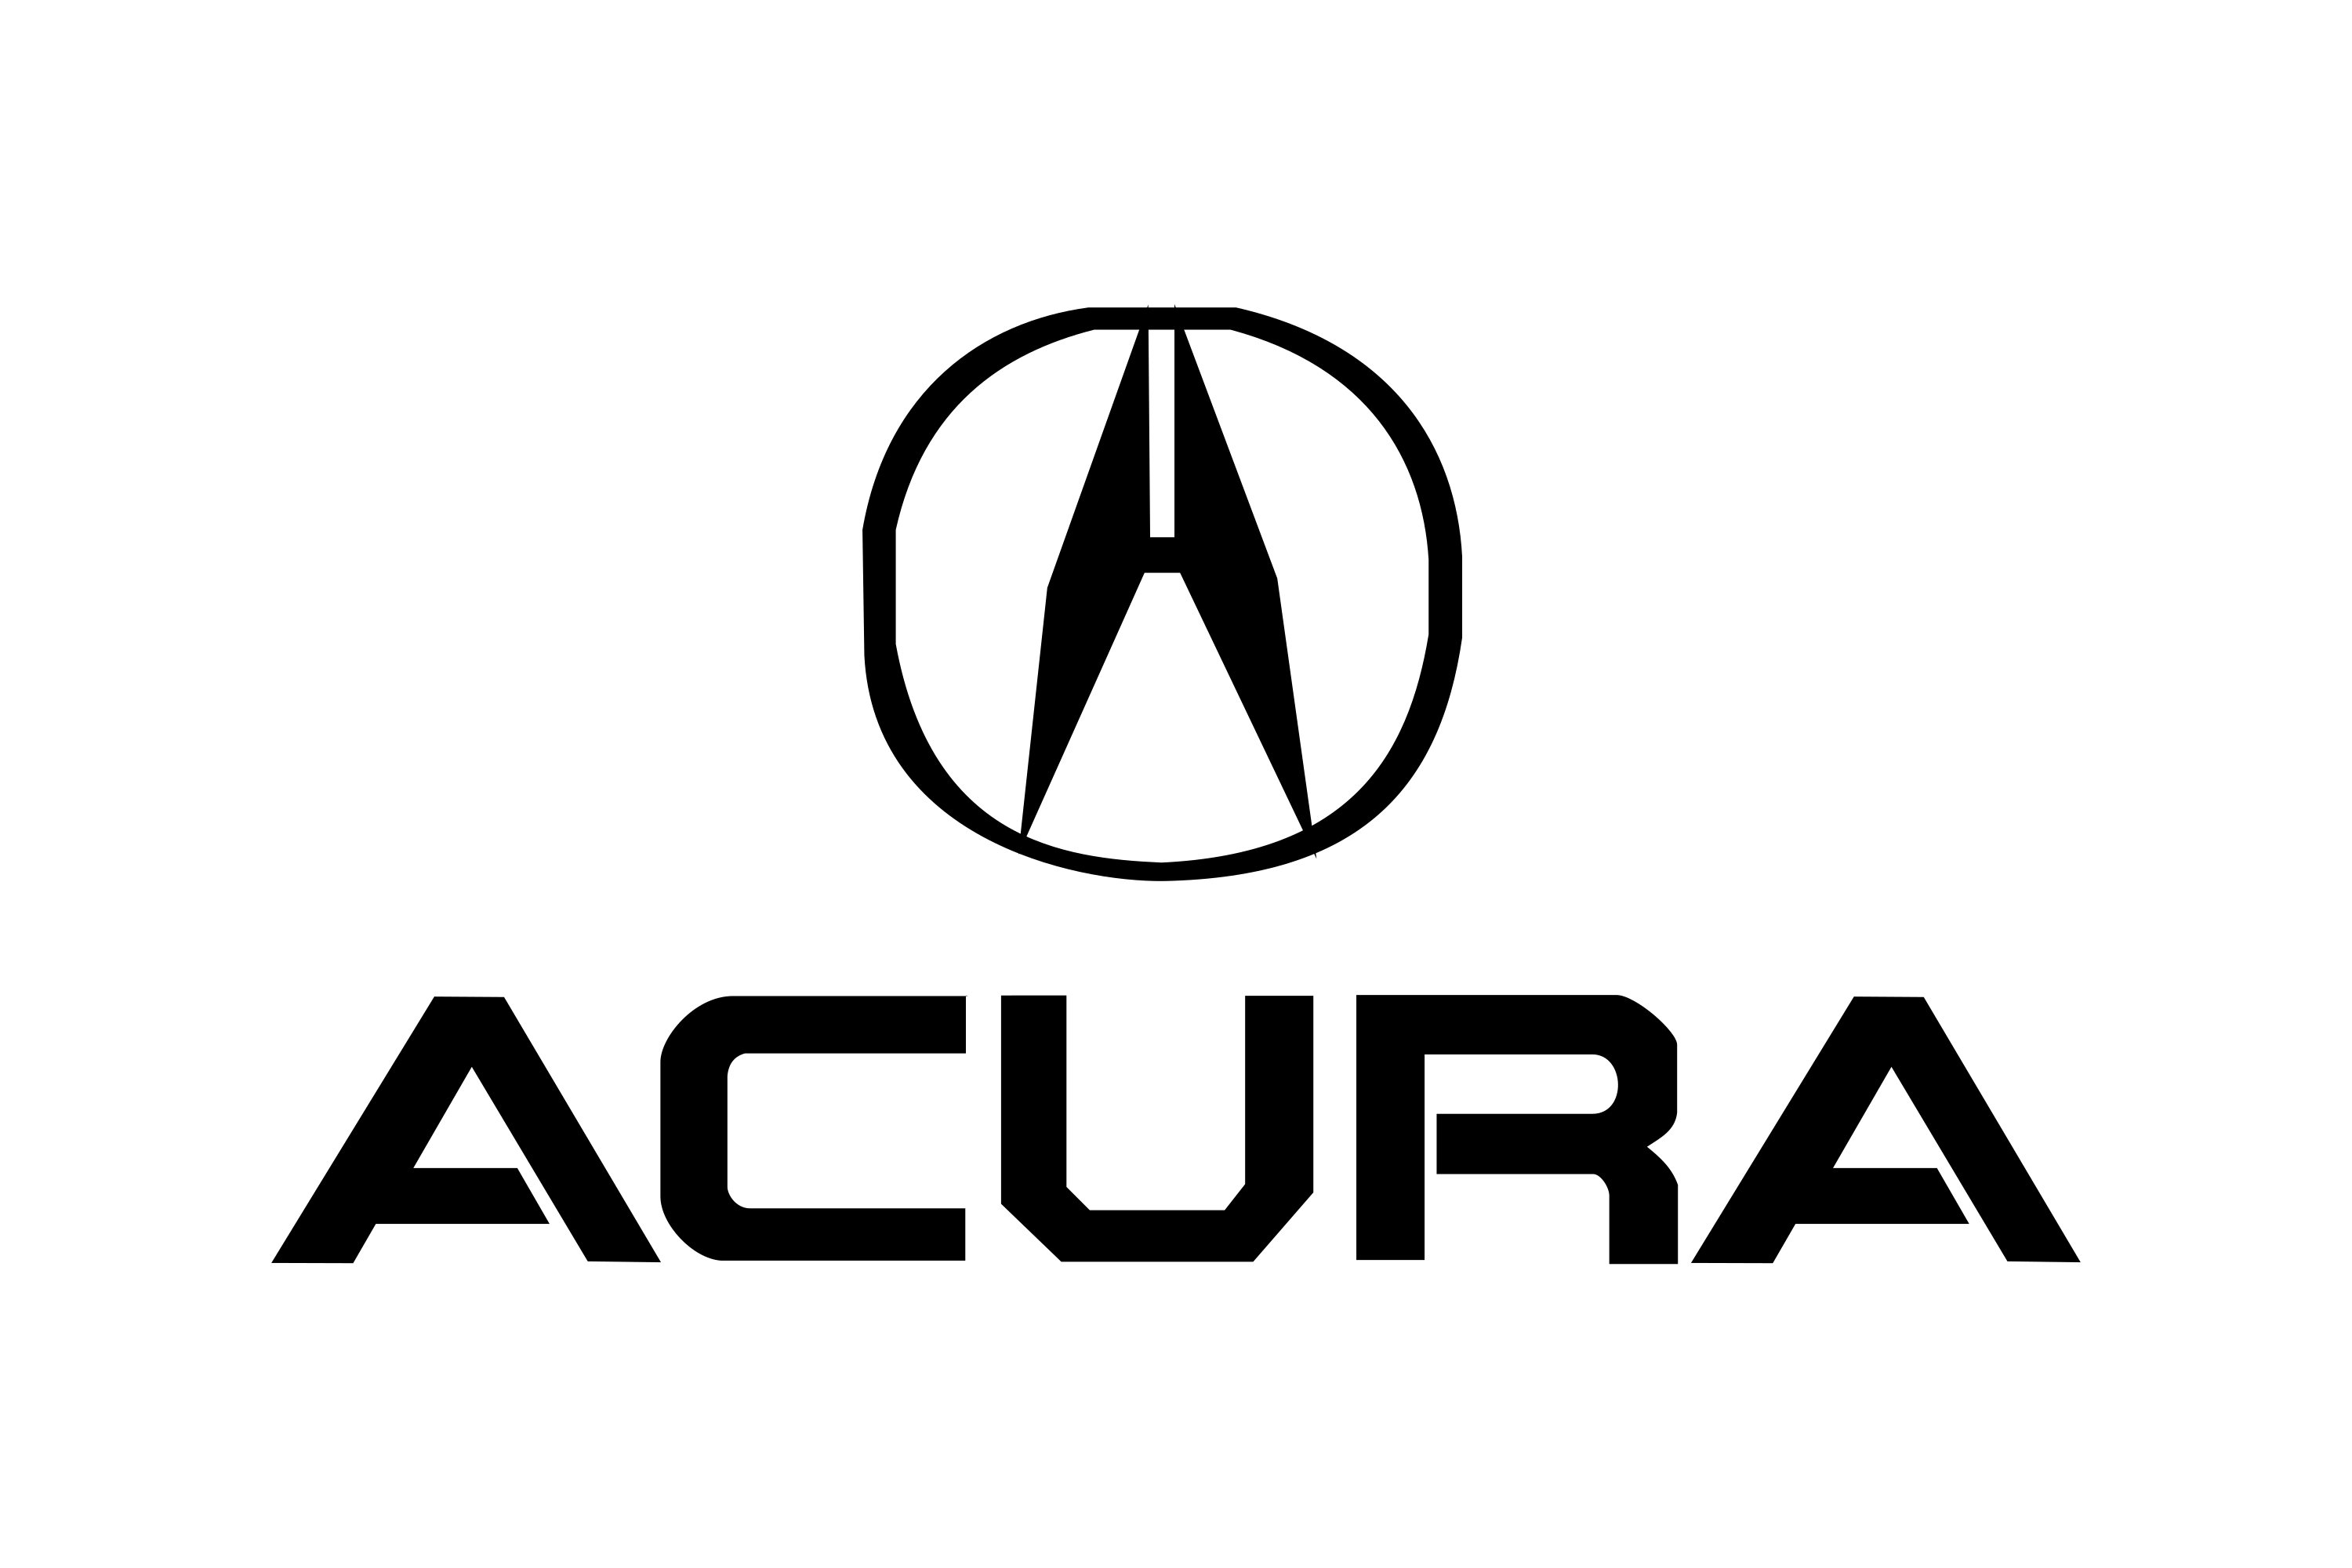 Download Acura Logo in SVG Vector or PNG File Format - Logo.wine